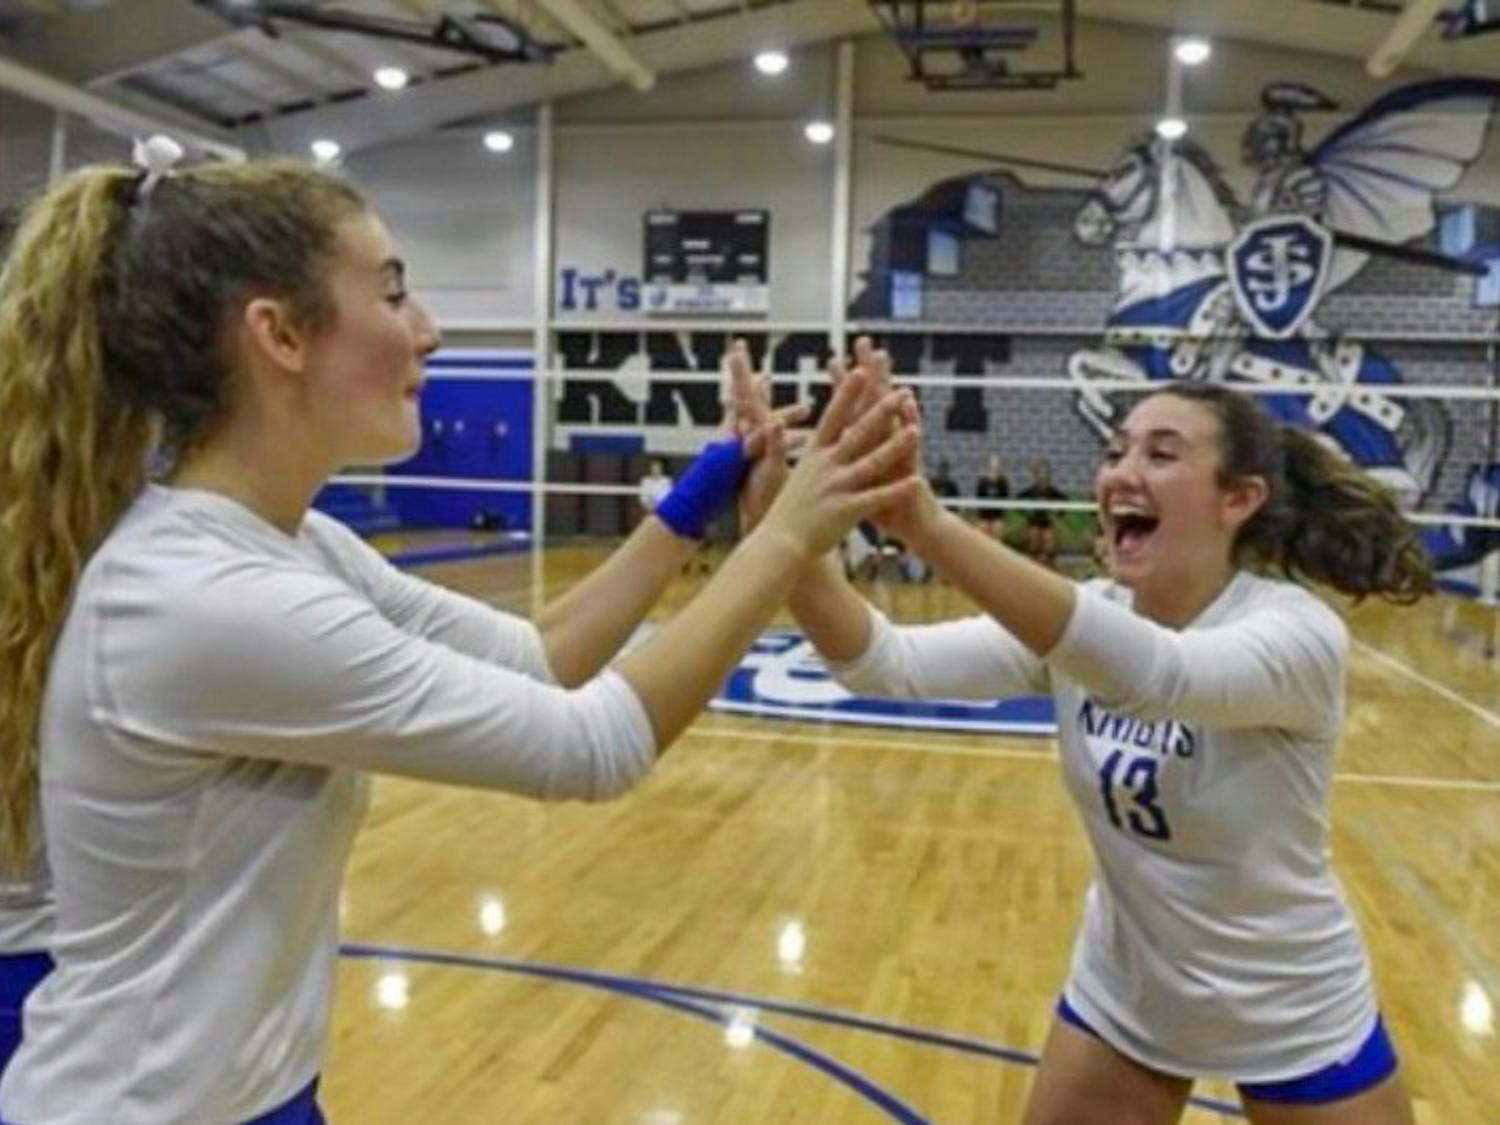 Freshman setter Kimmie Thompson (on right) celebrates with a teammate during a match at Saint Joseph's Catholic School. Thompson played varsity for the junior/senior high school for five years, earning four 2A state titles and winning the state championships her senior year.